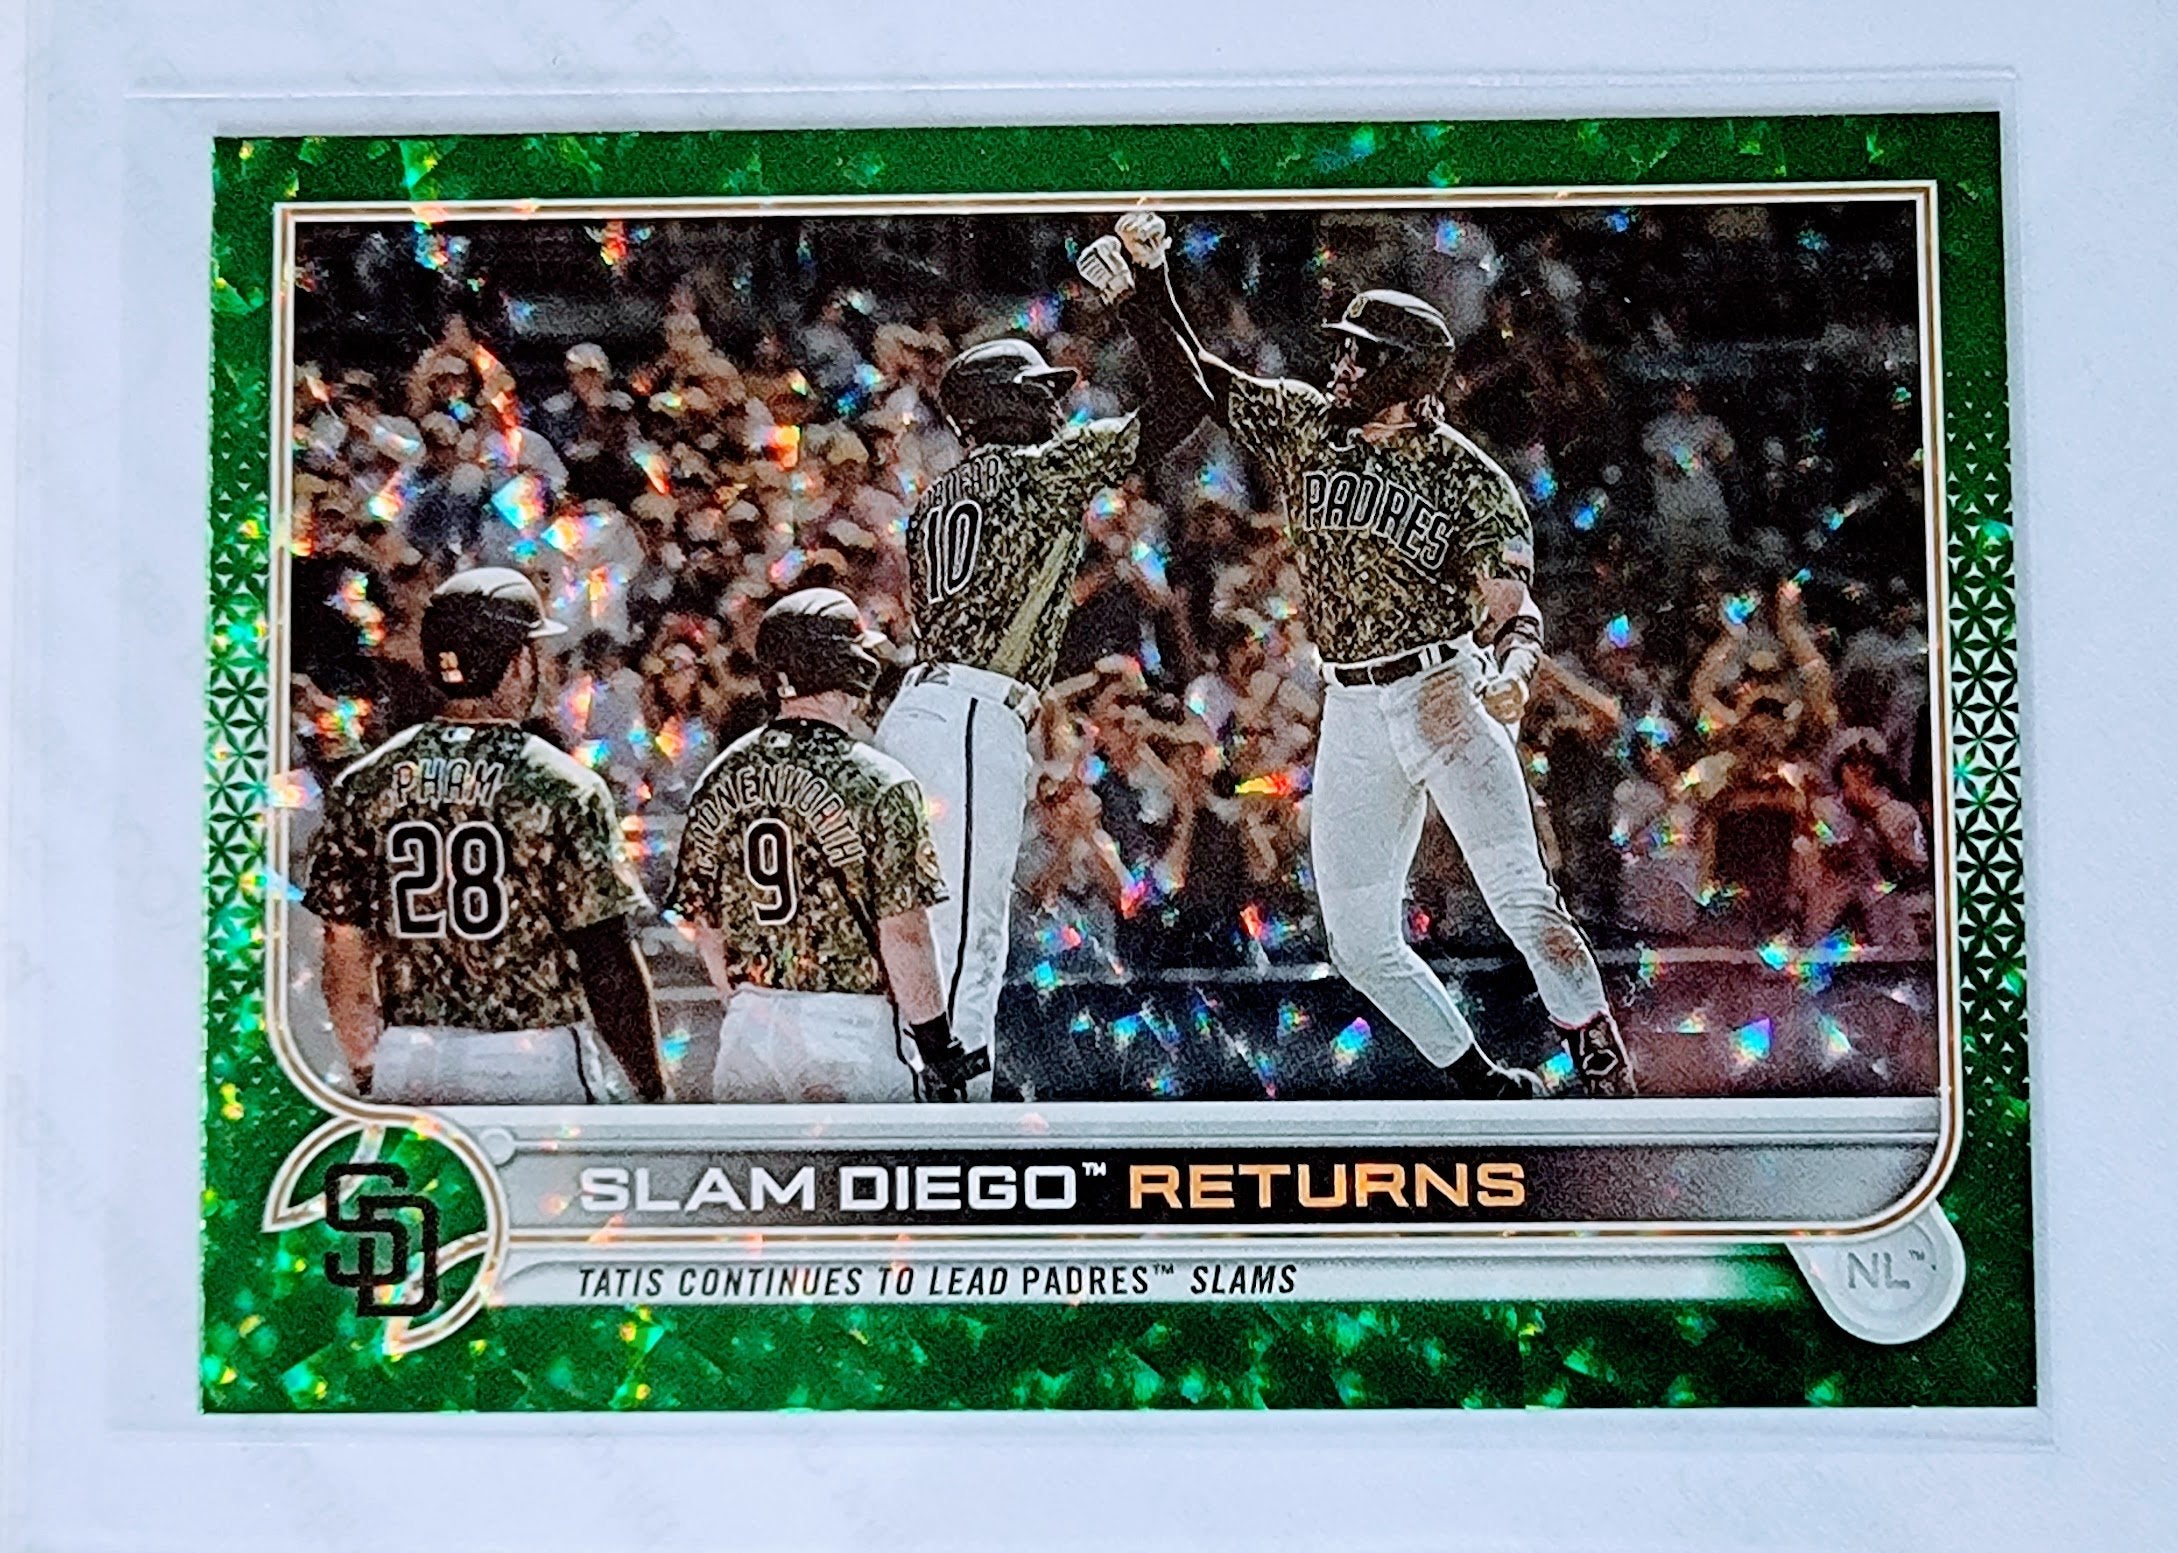 2022 Topps Slam Diego Returns Green Foil Refractor Baseball Trading Card GRB1 simple Xclusive Collectibles   